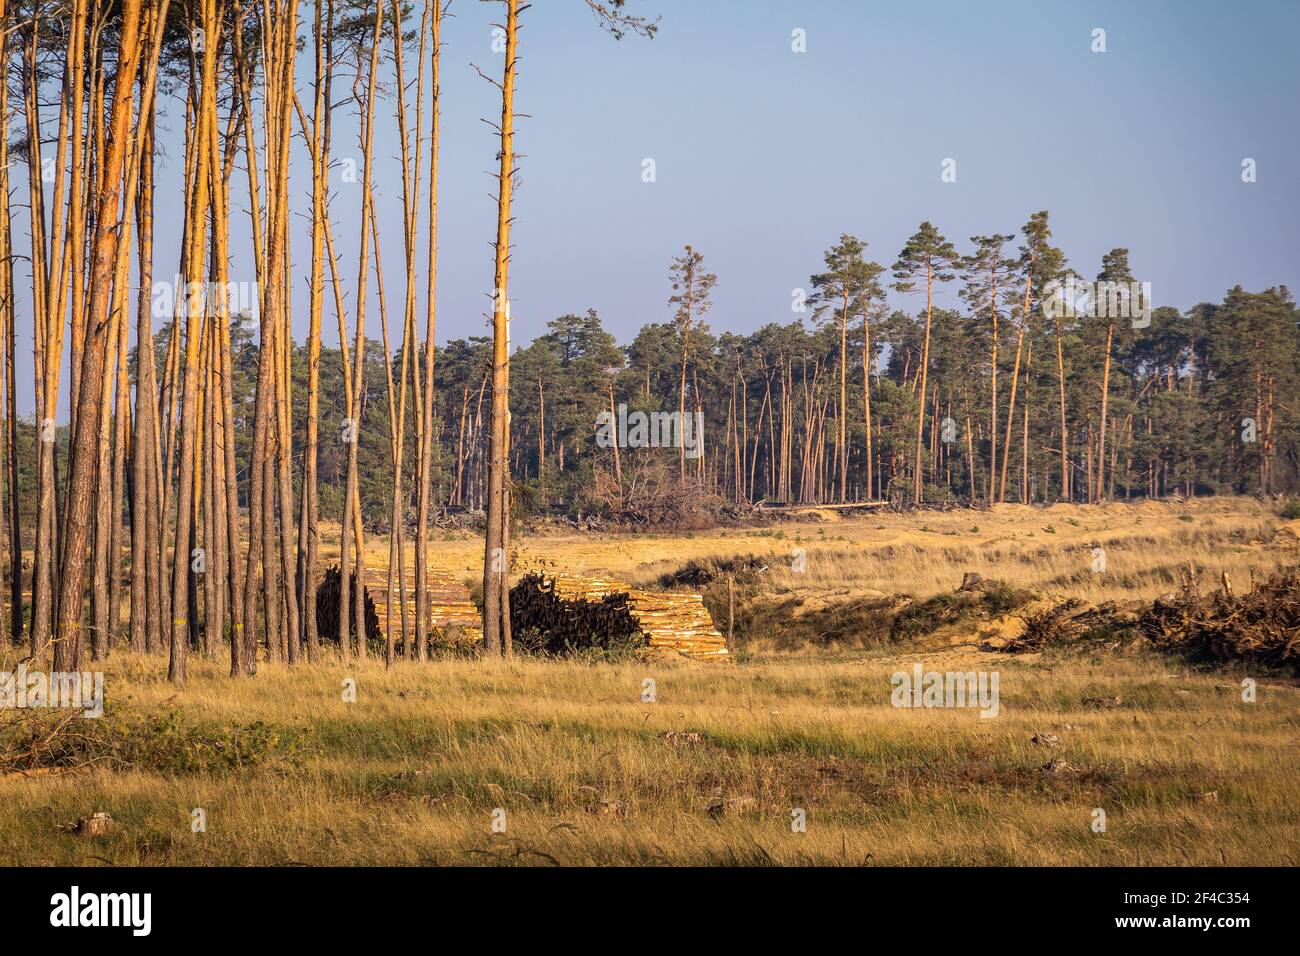 Deforestation in nature. Lumber industry and impact on the environment. Pine trees forest Stock Photo